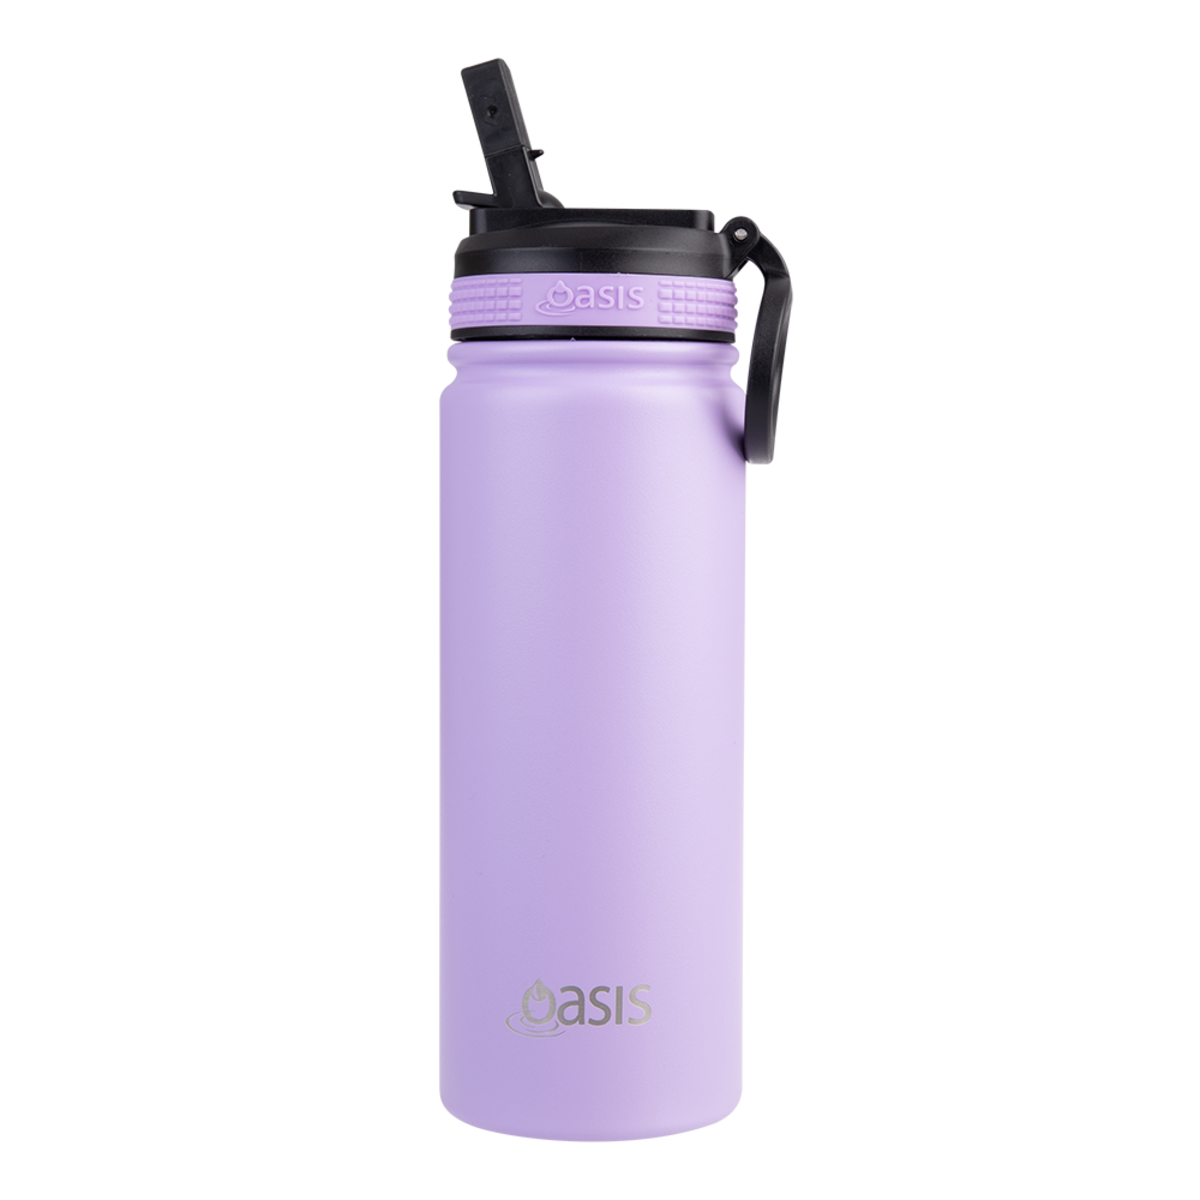 OASIS STAINLESS STEEL DOUBLE WALL INSULATED "CHALLENGER" SPORTS BOTTLE W/ SIPPER STRAW 550ML - Lavender